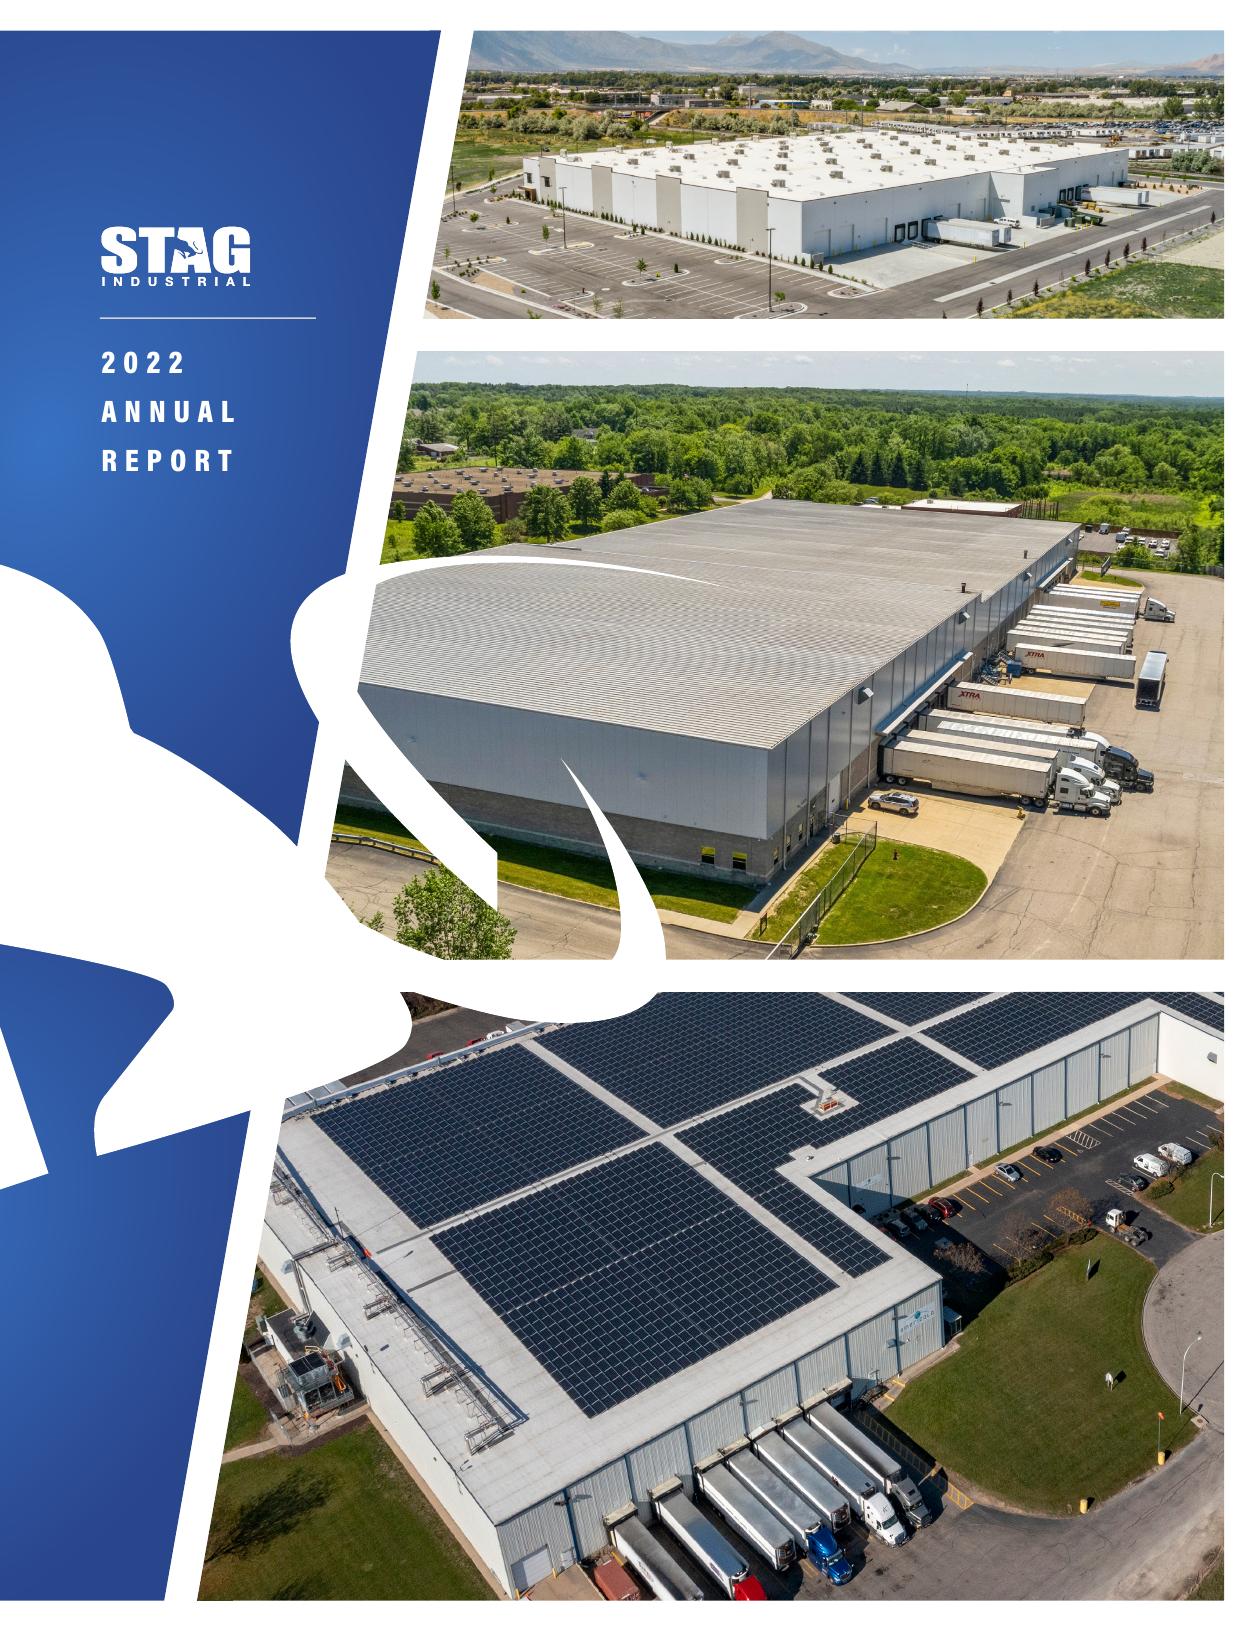 STAGINDUSTRIAL 2022 Annual Report